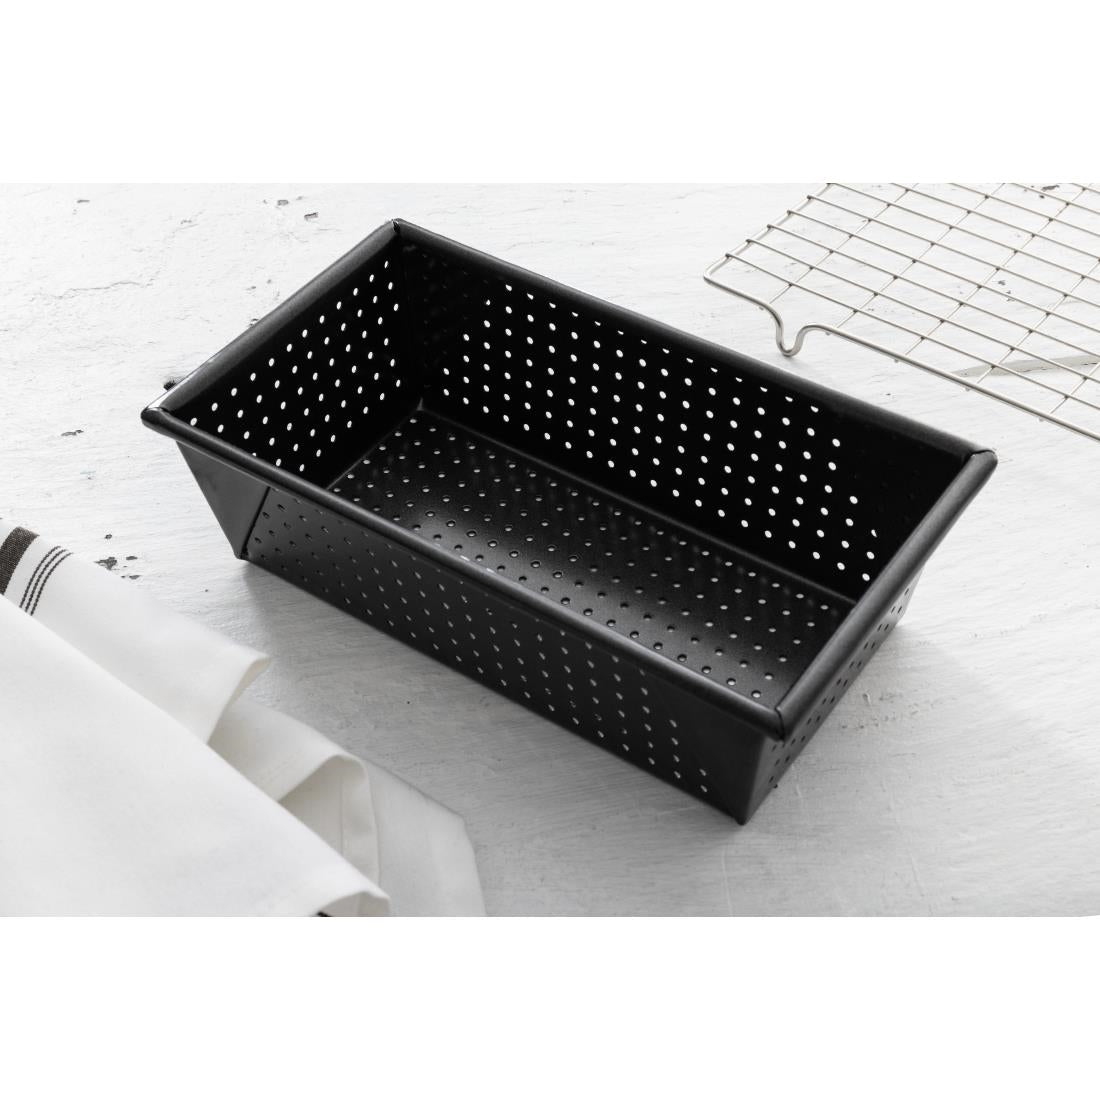 CS565 Masterclass Crusty Bake Perforated Loaf Tin 2lb JD Catering Equipment Solutions Ltd